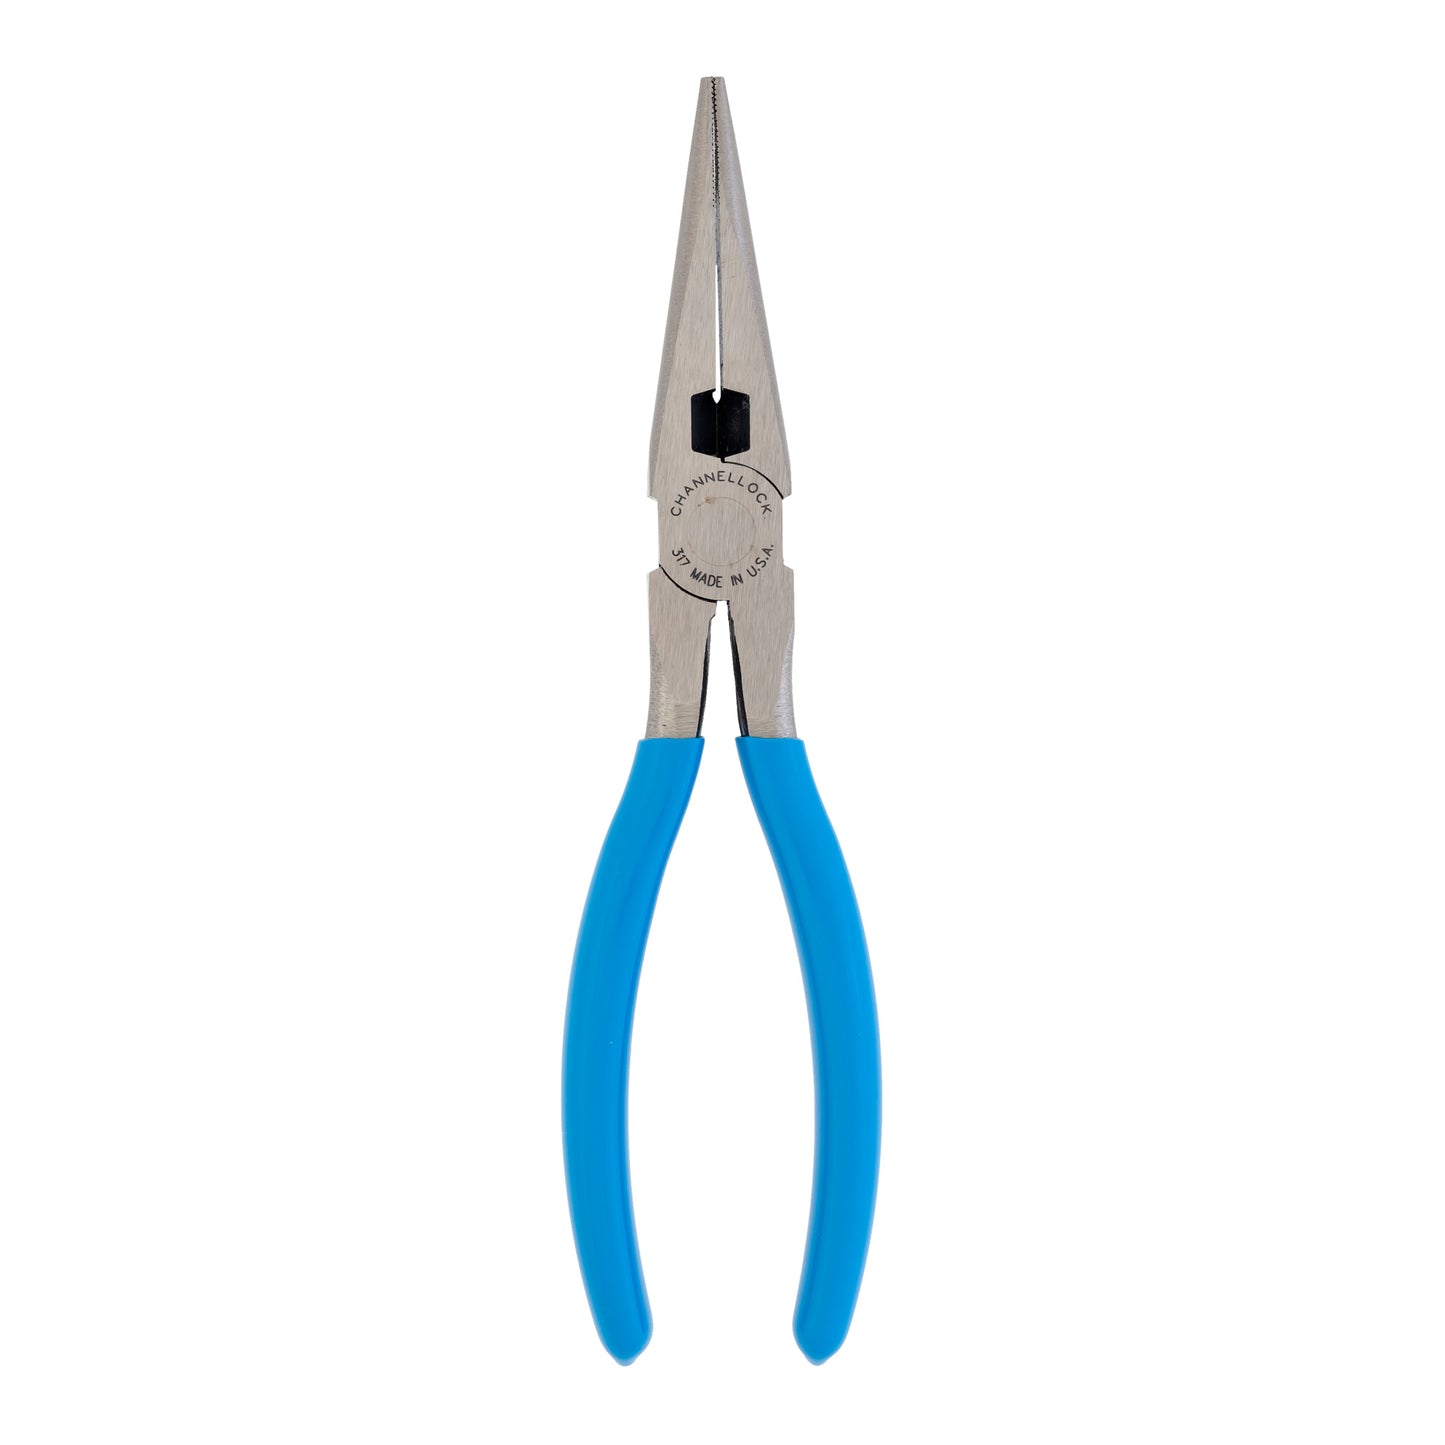 8-inch Long Nose Pliers with Side Cutter (317)